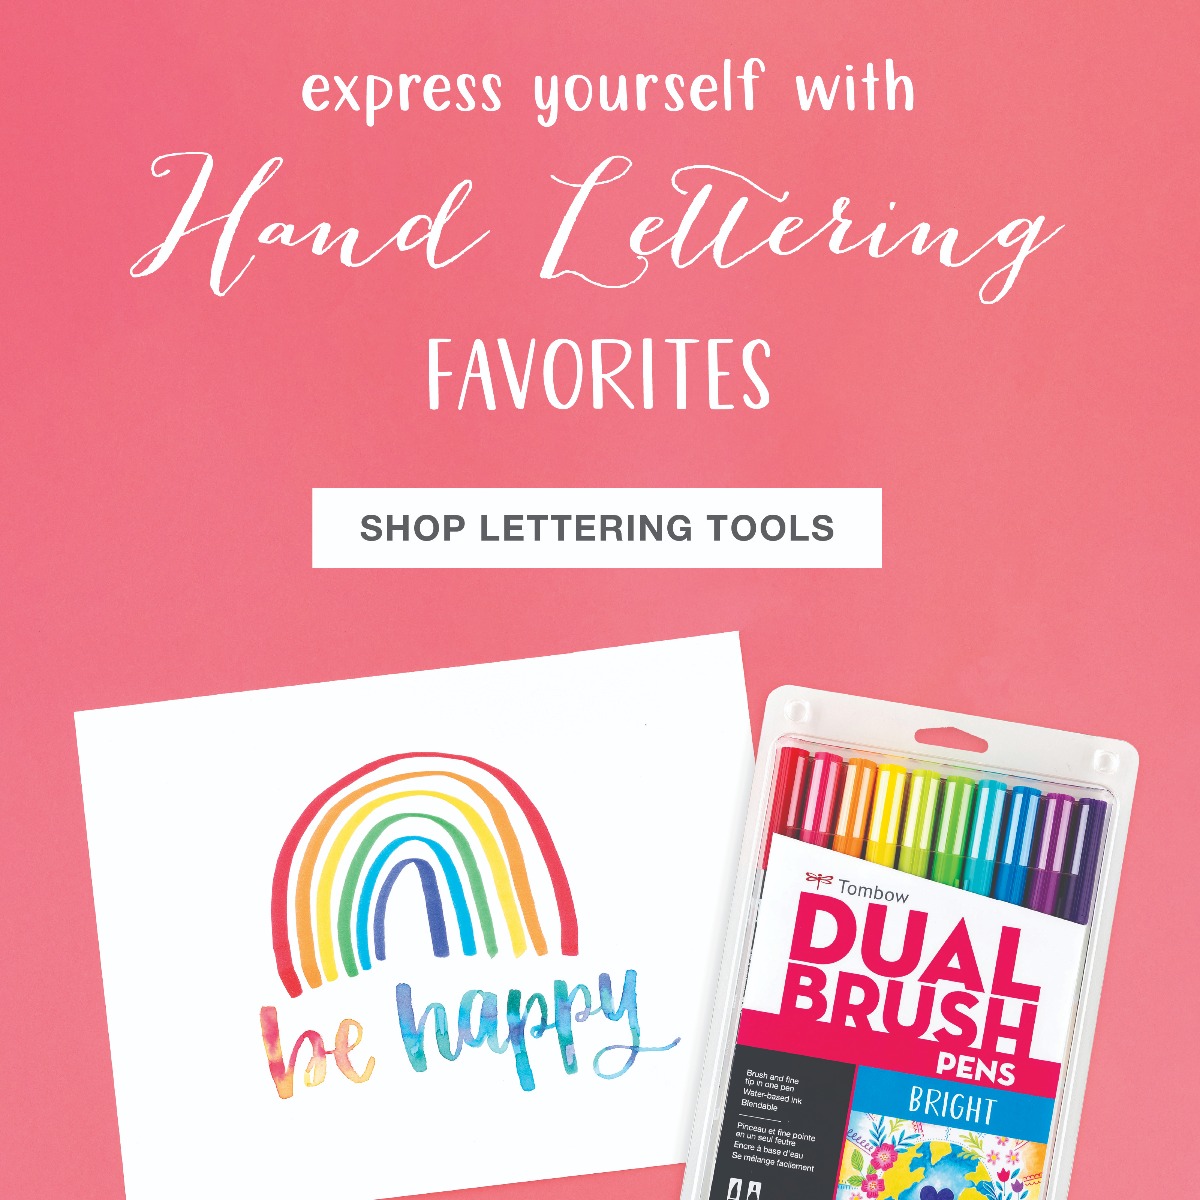 Express yourself with hand lettering favorites. Click to shop lettering tools.